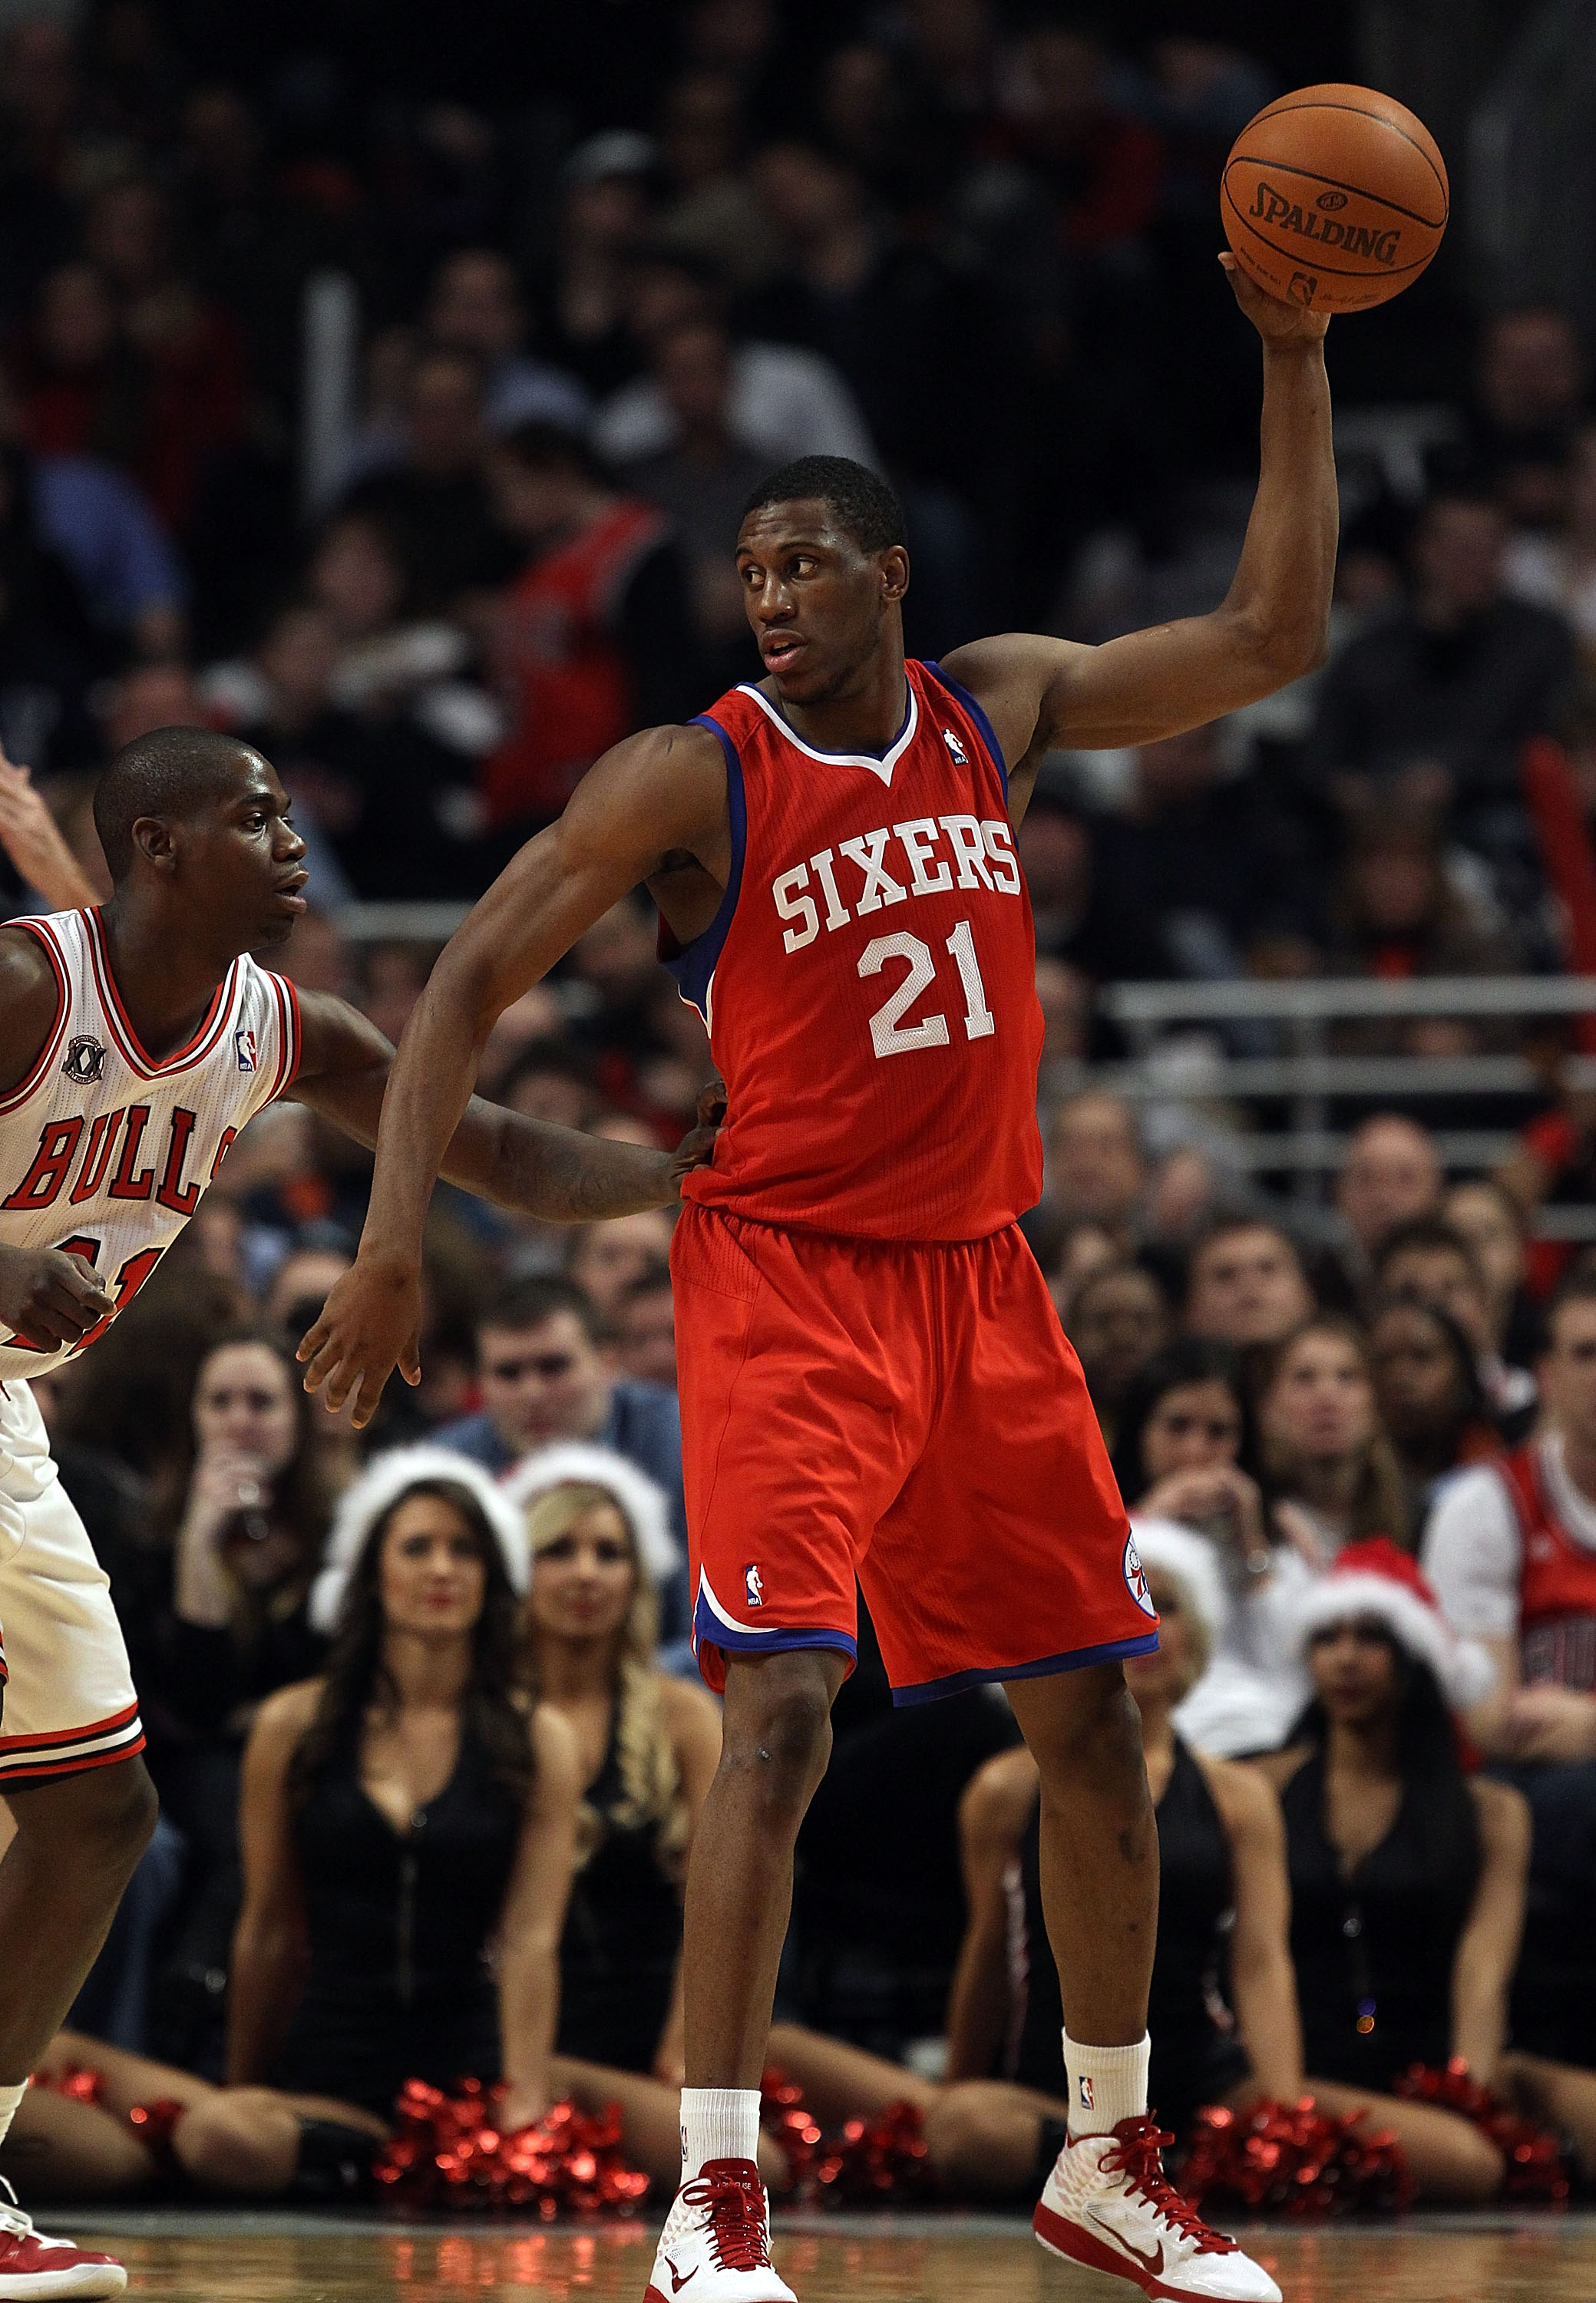 CHICAGO, IL - DECEMBER 21: Thaddeus Young #21 of the Philadelphia 76ers looks to pass against the Chicago Bulls at the United Center on December 21, 2010 in Chicago, Illinois. The Bulls defeated the 76ers 121-76. NOTE TO USER: User expressly acknowledges